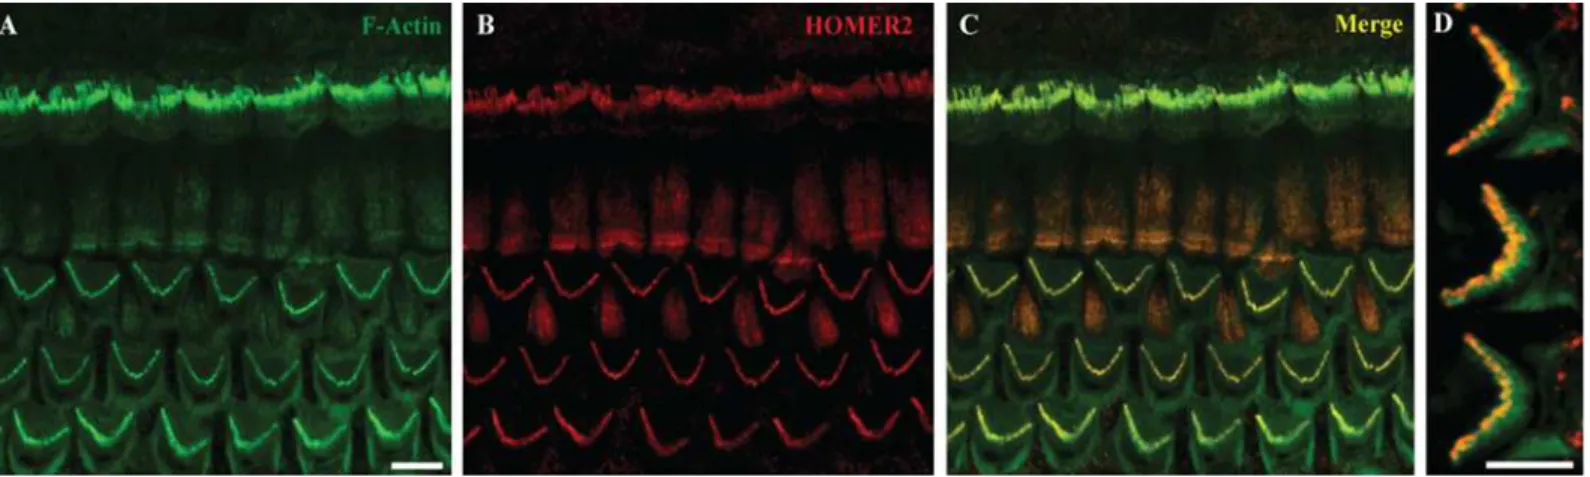 Fig 2. Homer2 expression in P2 mouse inner ear. (A) Staining with F-actin shows three rows of OHCs and one row of IHCs in the cochlea